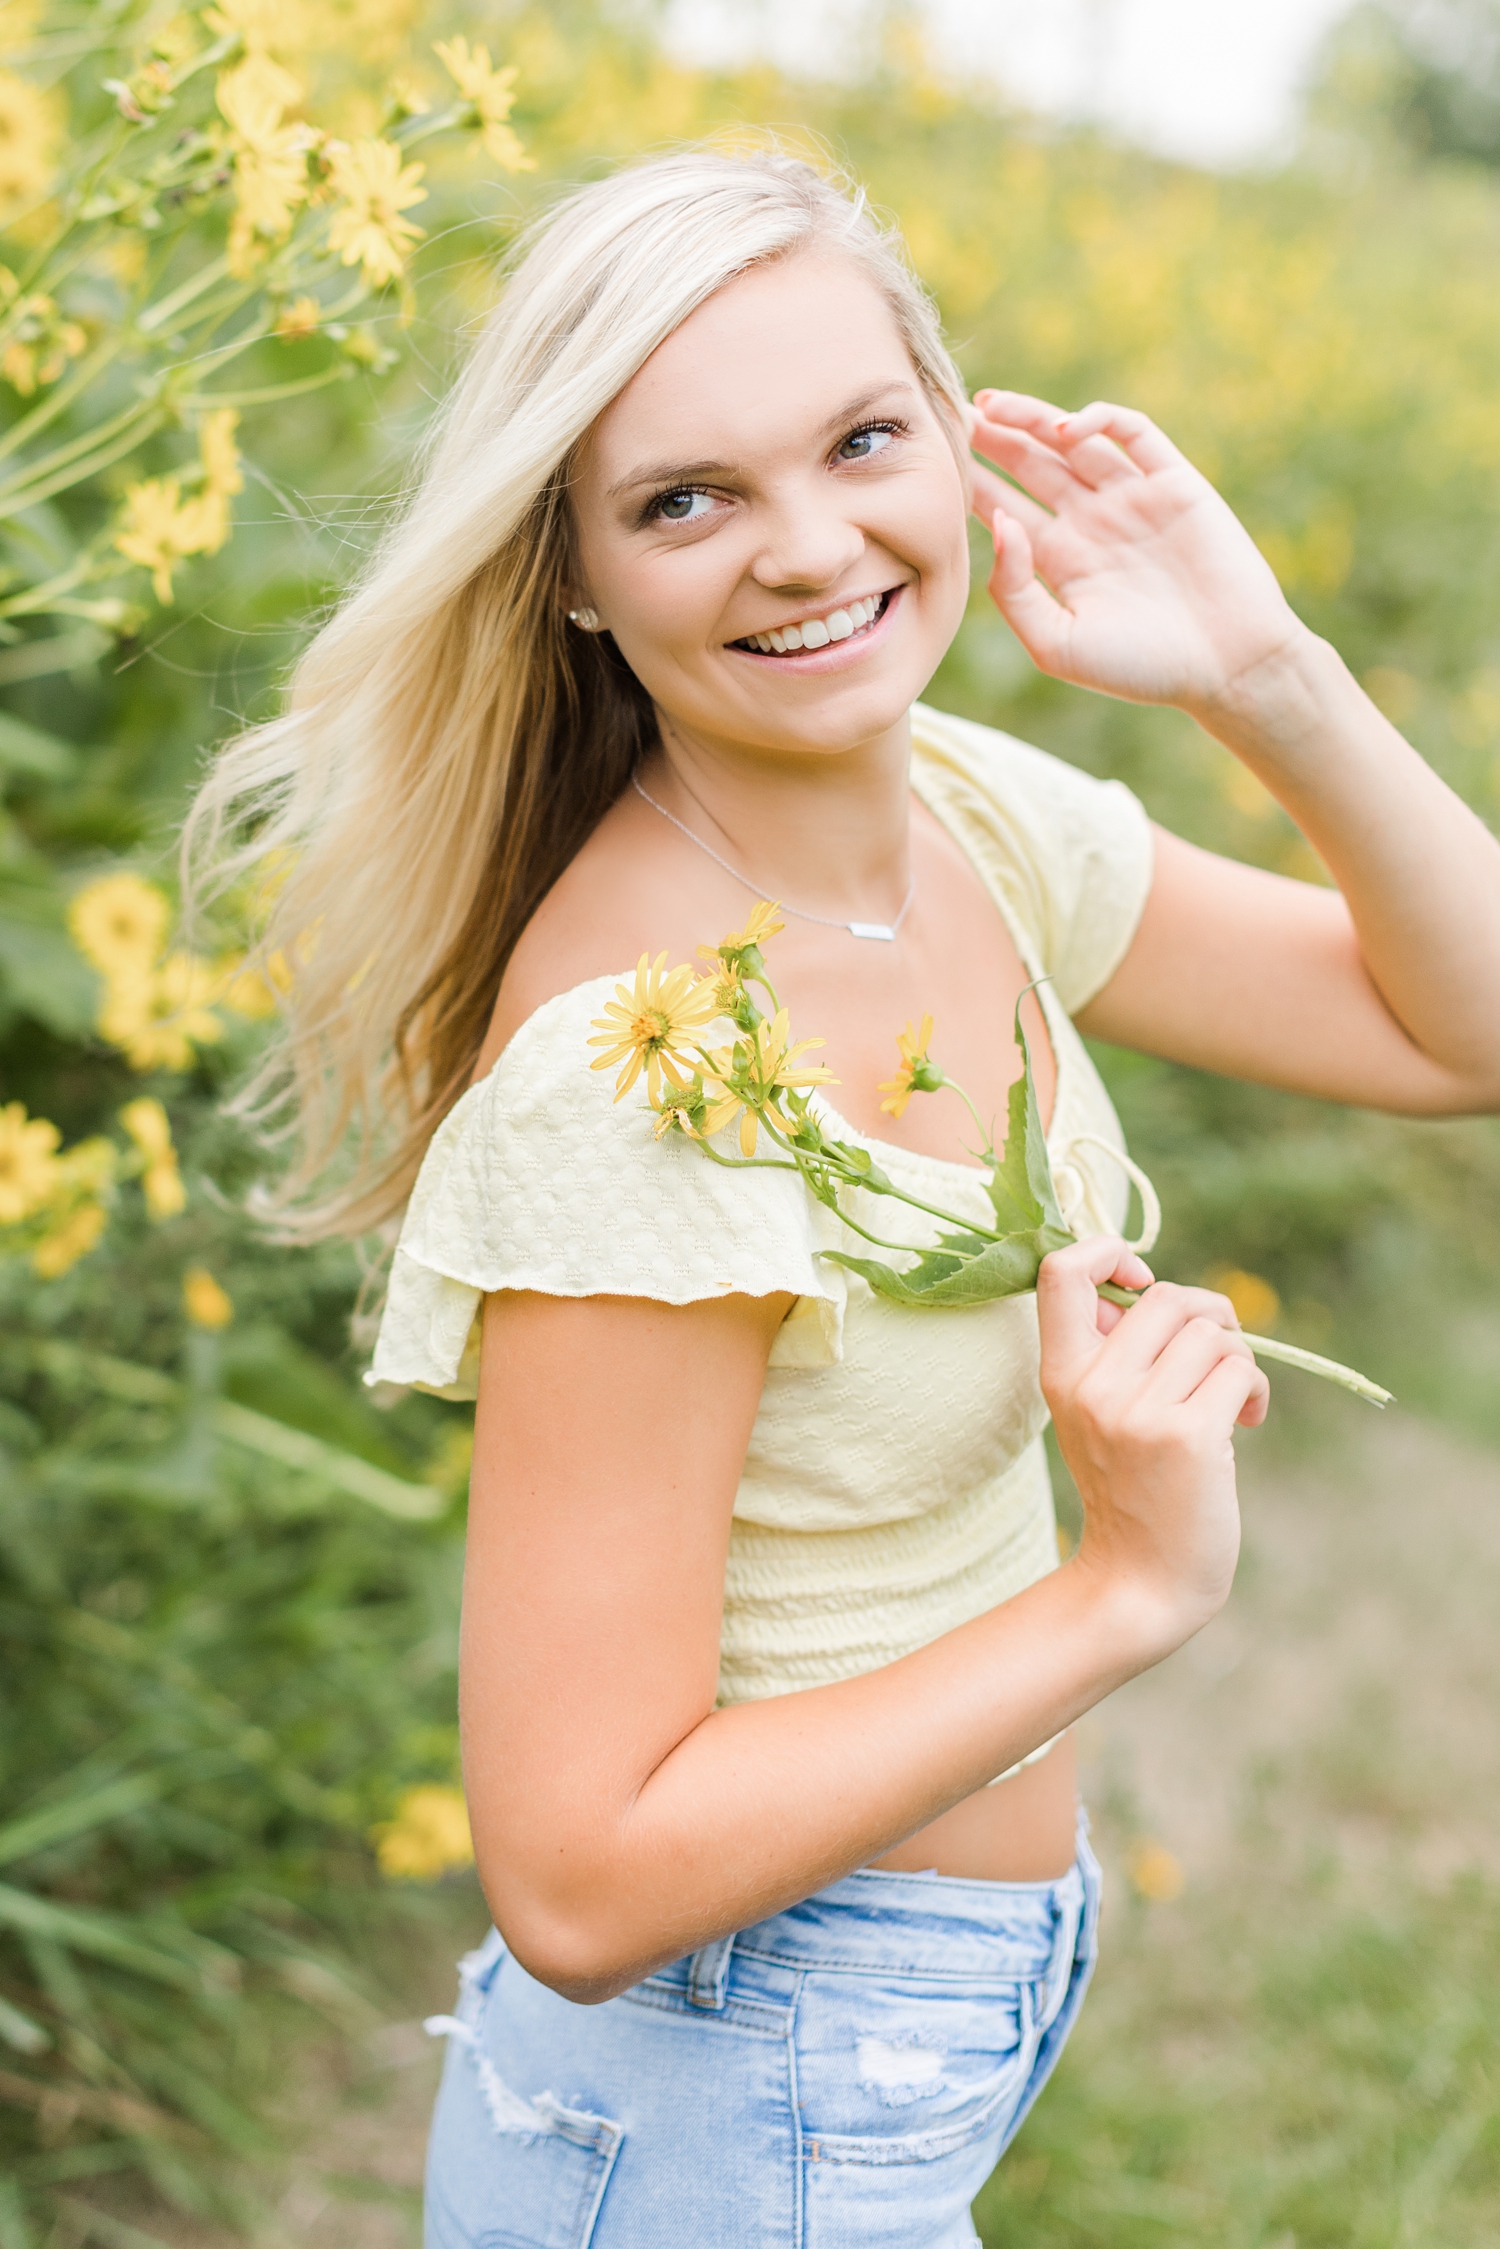 Jade laughs as the breeze blows through her hair in a yellow cup plant field | CB Studio